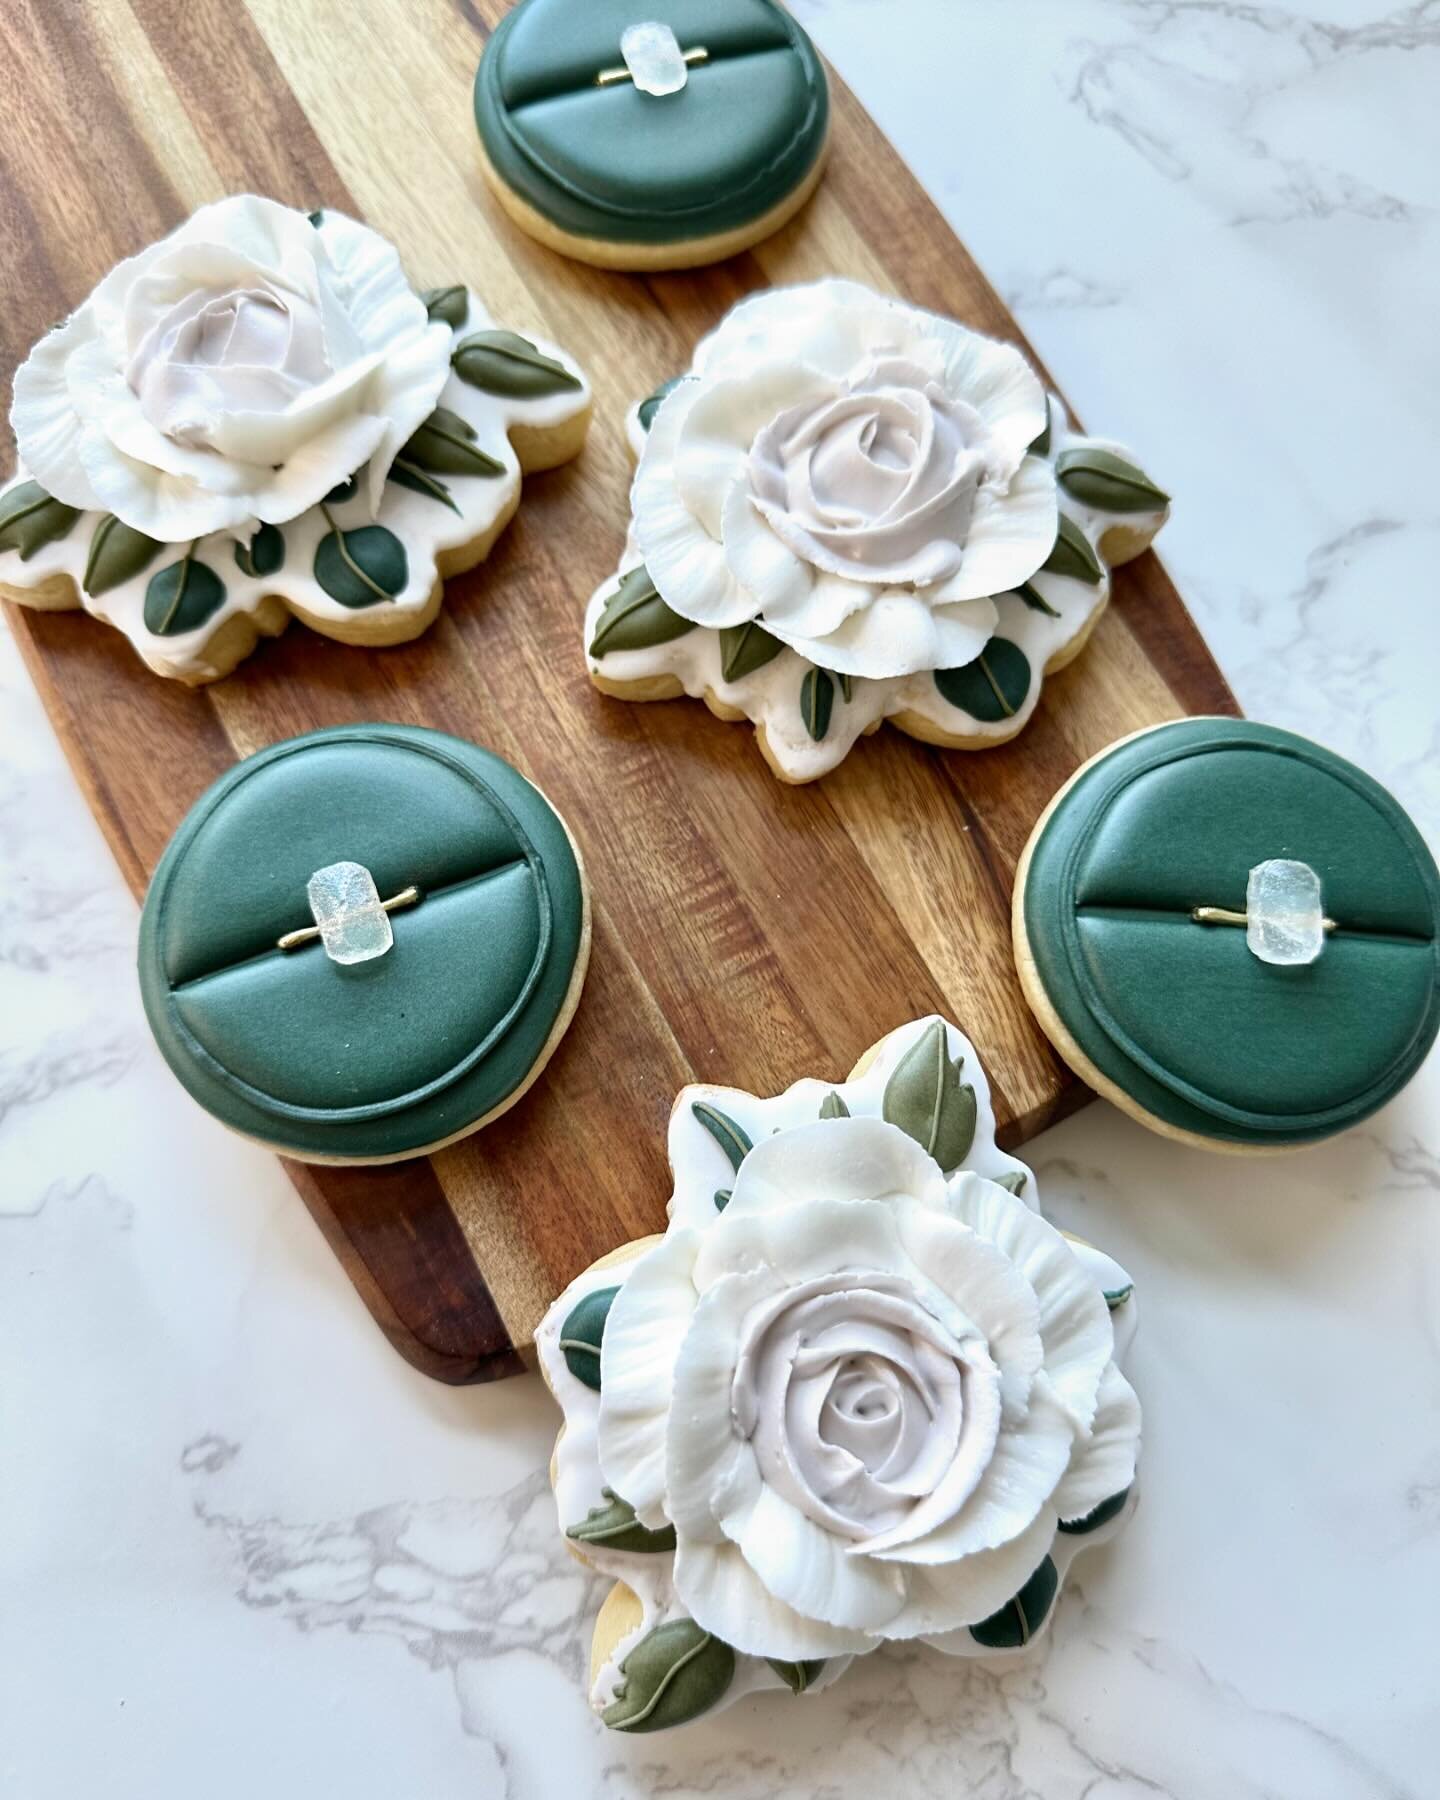 All of the views ✨ Happy Love Day my friends ✨

#decoratedsugarcookies #royalicingcookies #decoratedcookies #cookieart #engagement #engagementring #engagementcookies